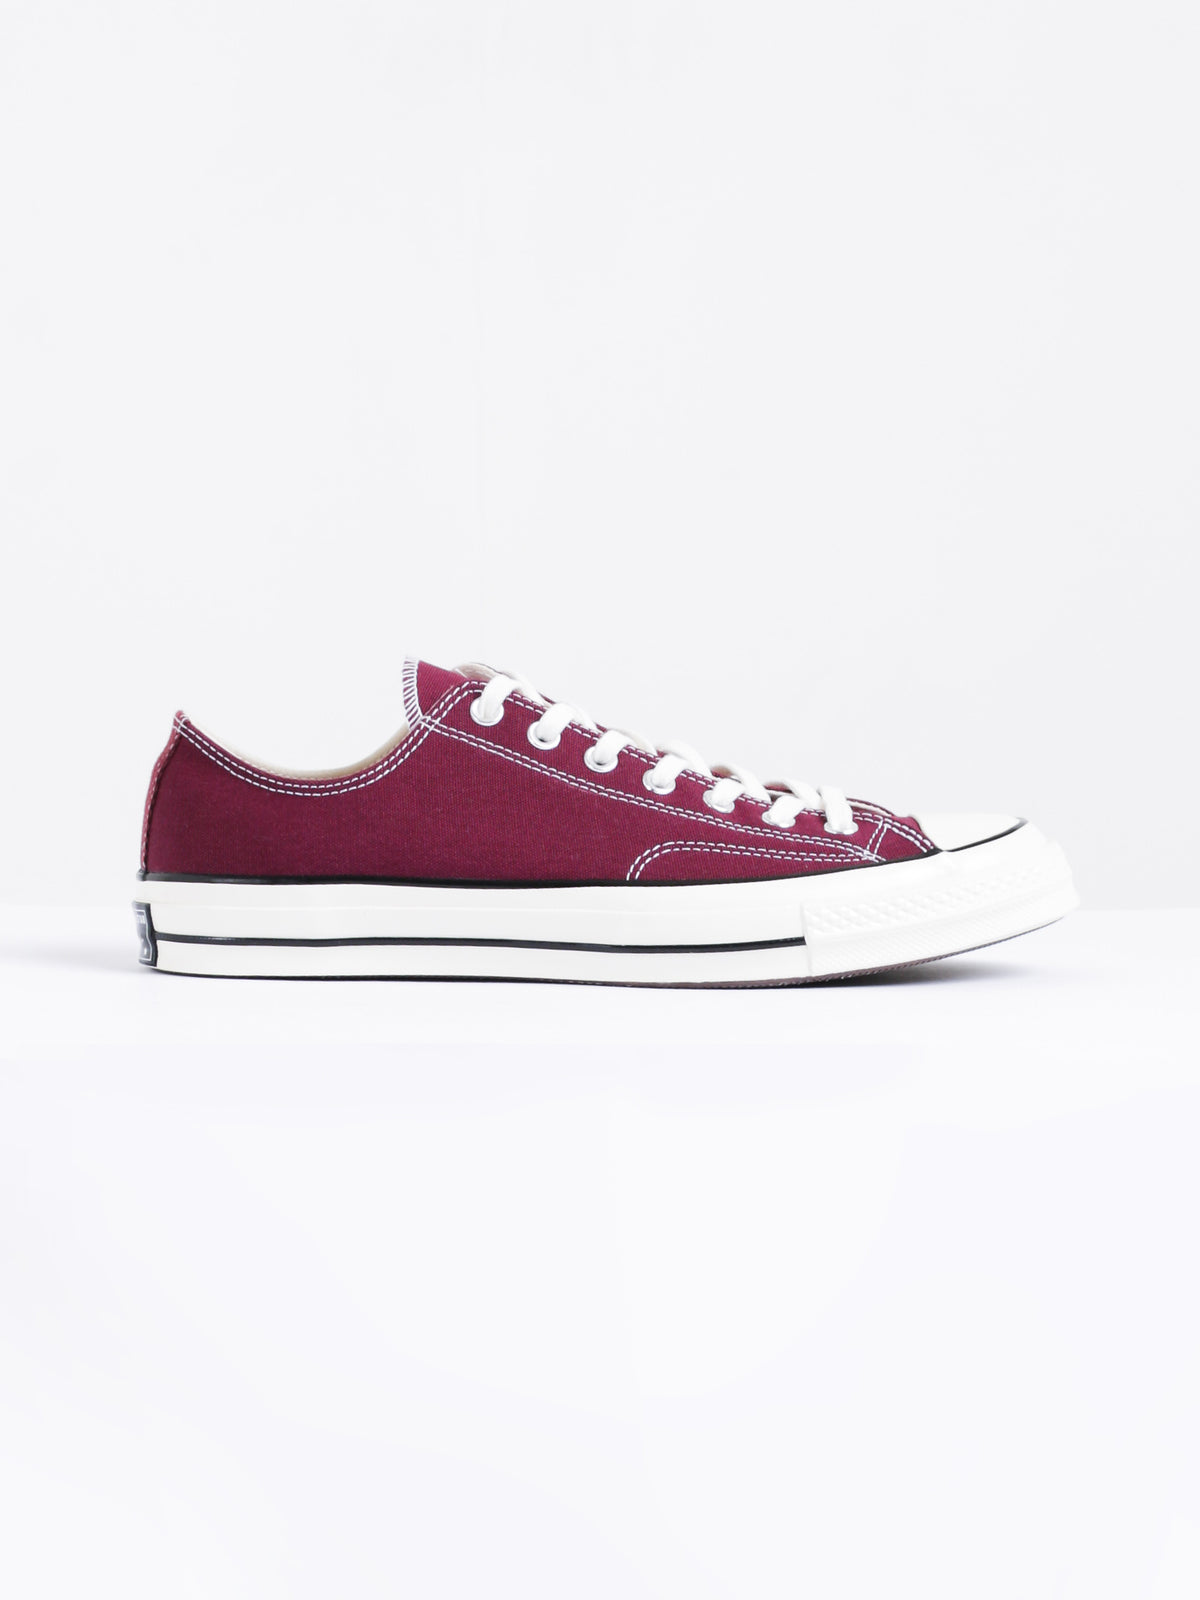 Mens Chuck Taylor All Star Low Top Sneakers in Obsidian Red